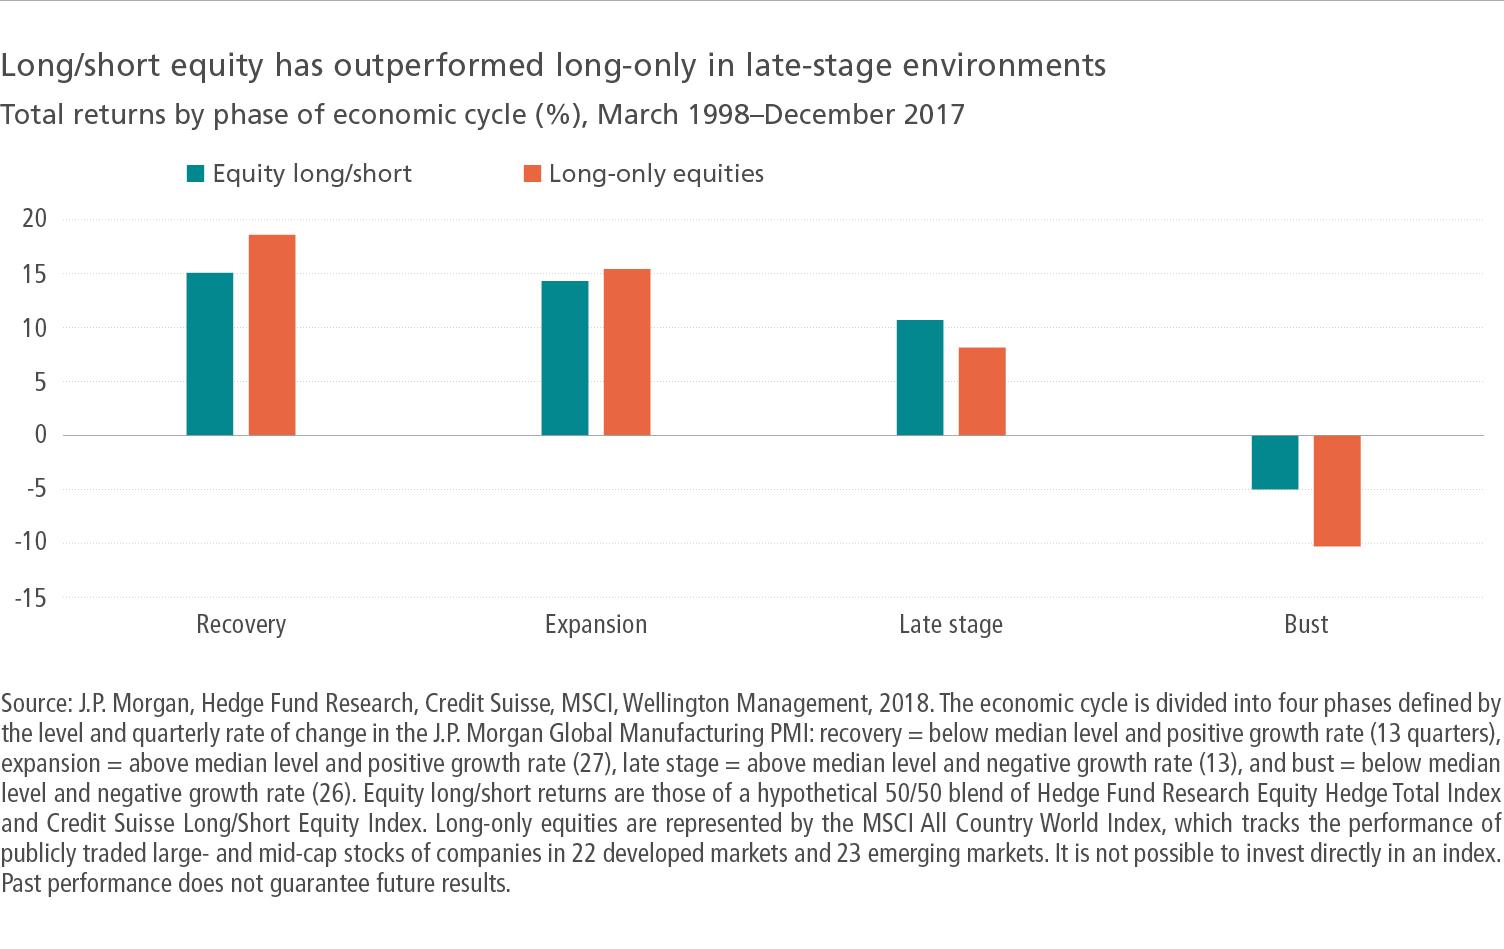 Long/short equity has outperformed long-only in late-stage environments